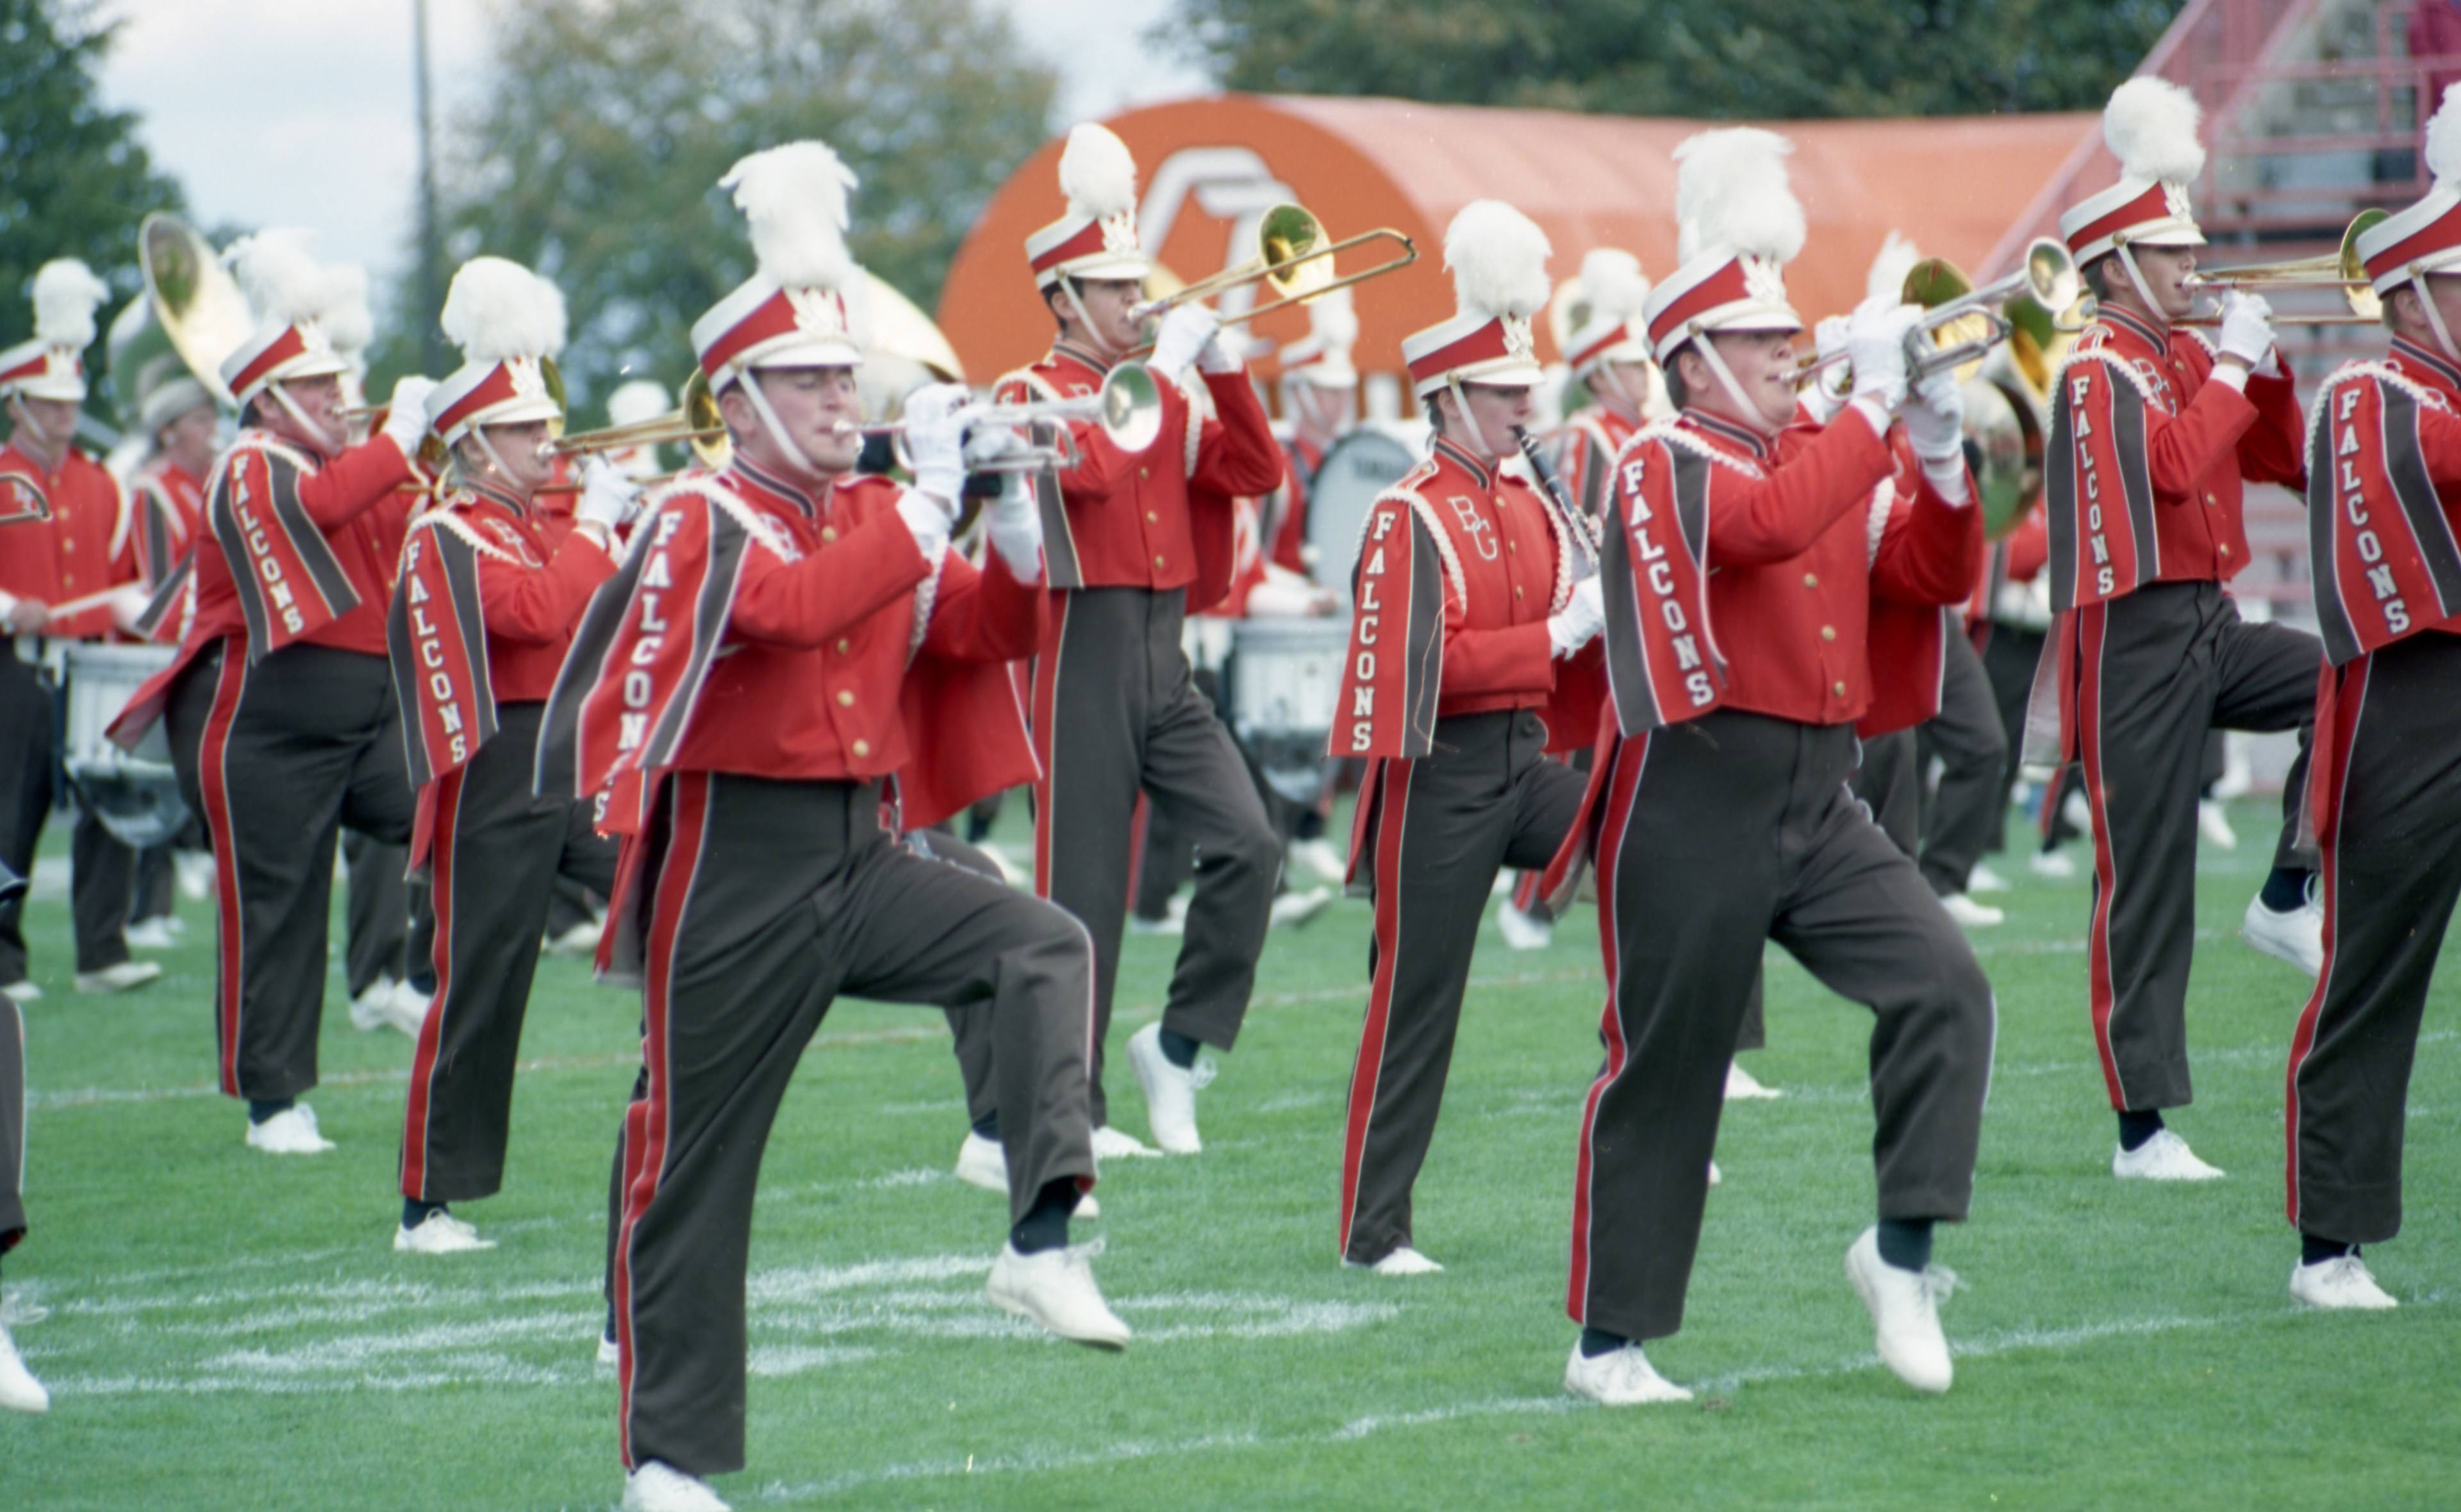 Band members perform a pregame routine at Doyt L. Perry Stadium